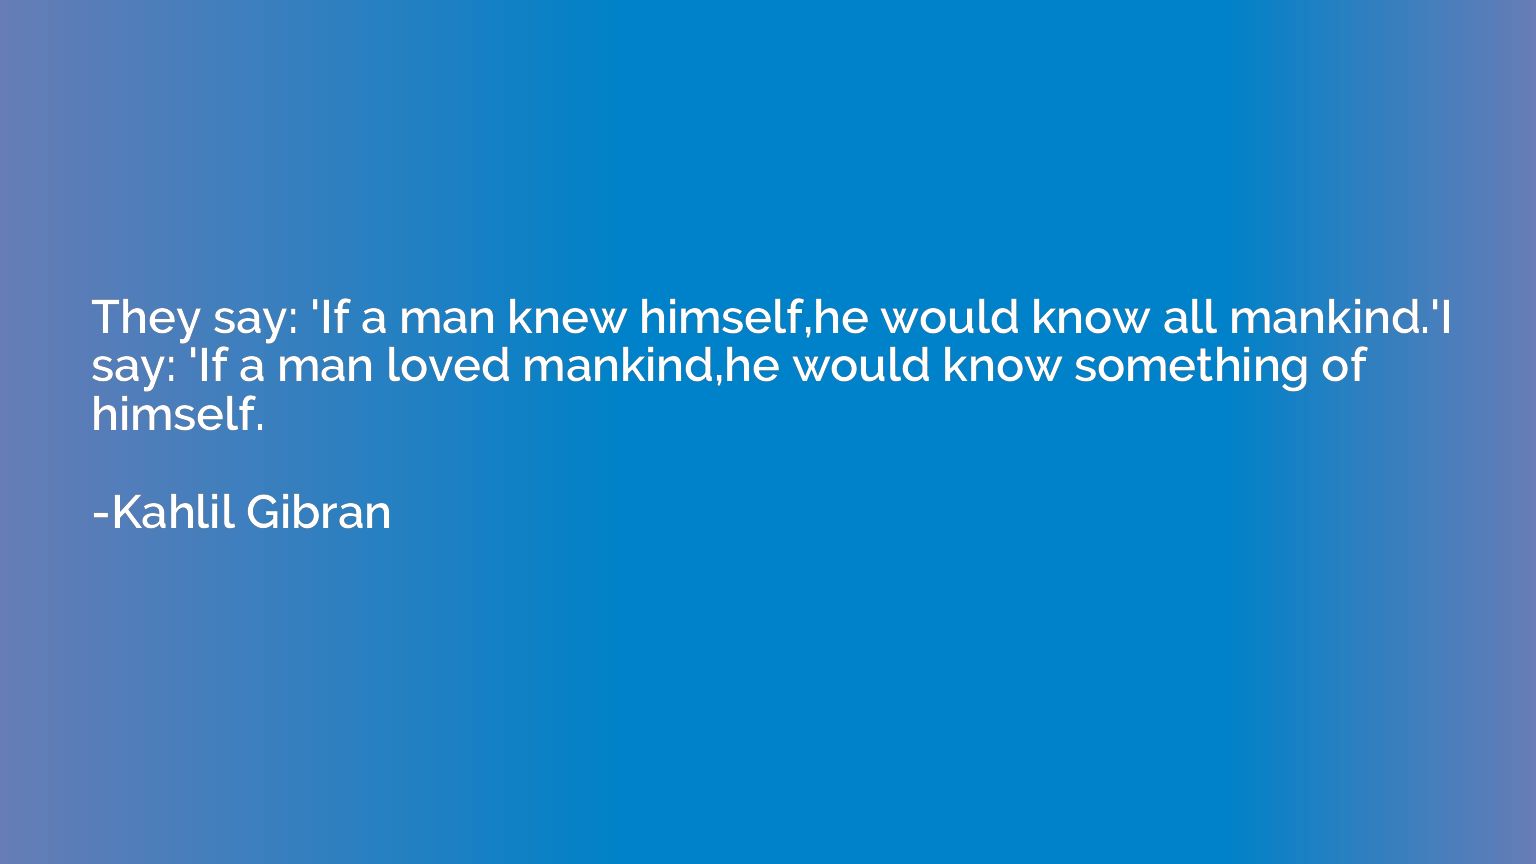 They say: 'If a man knew himself,he would know all mankind.'